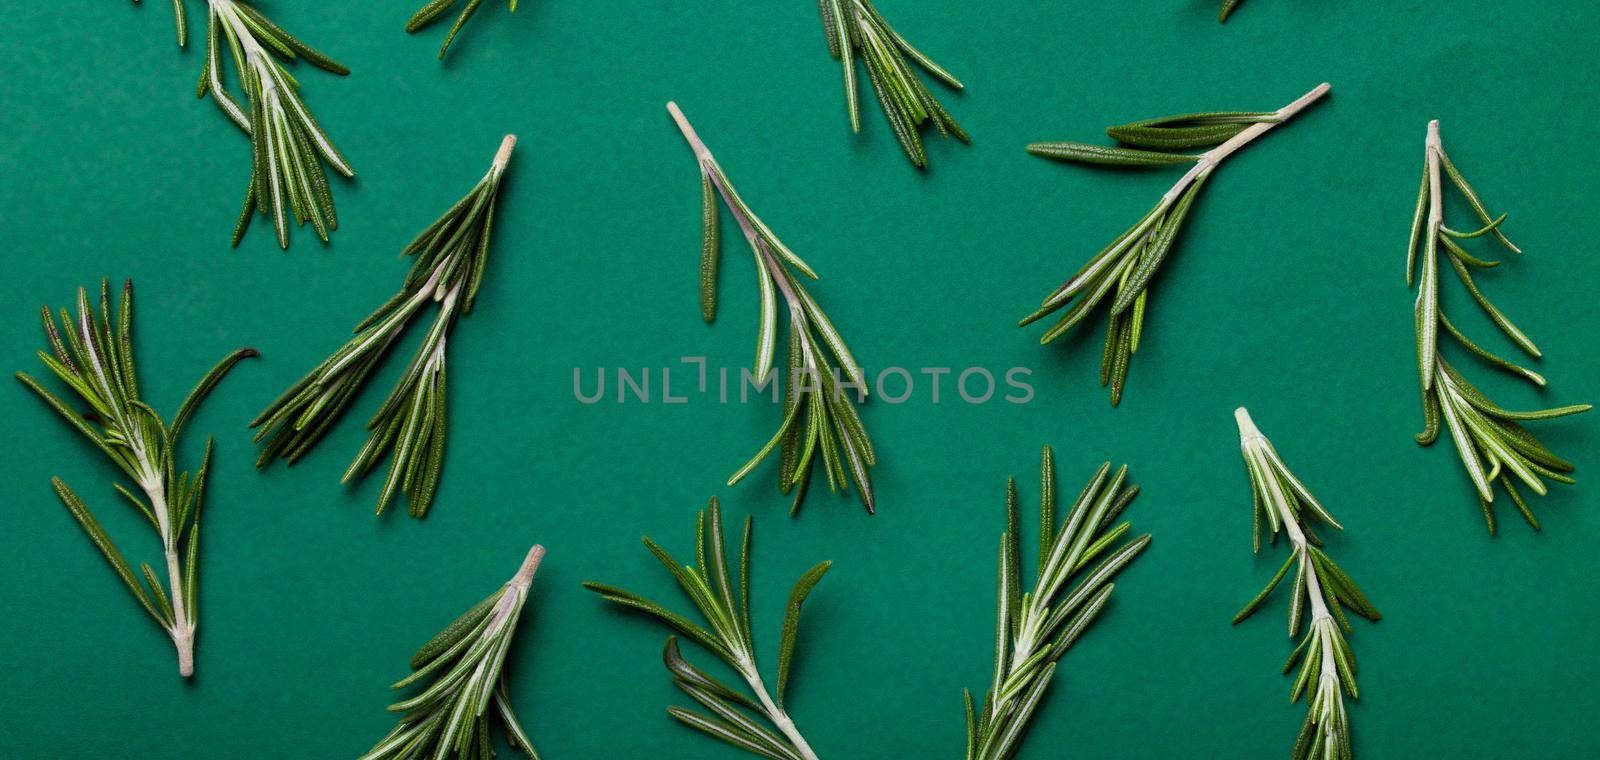 Rosemary food background with rosemary branches on minimal green background by its_al_dente